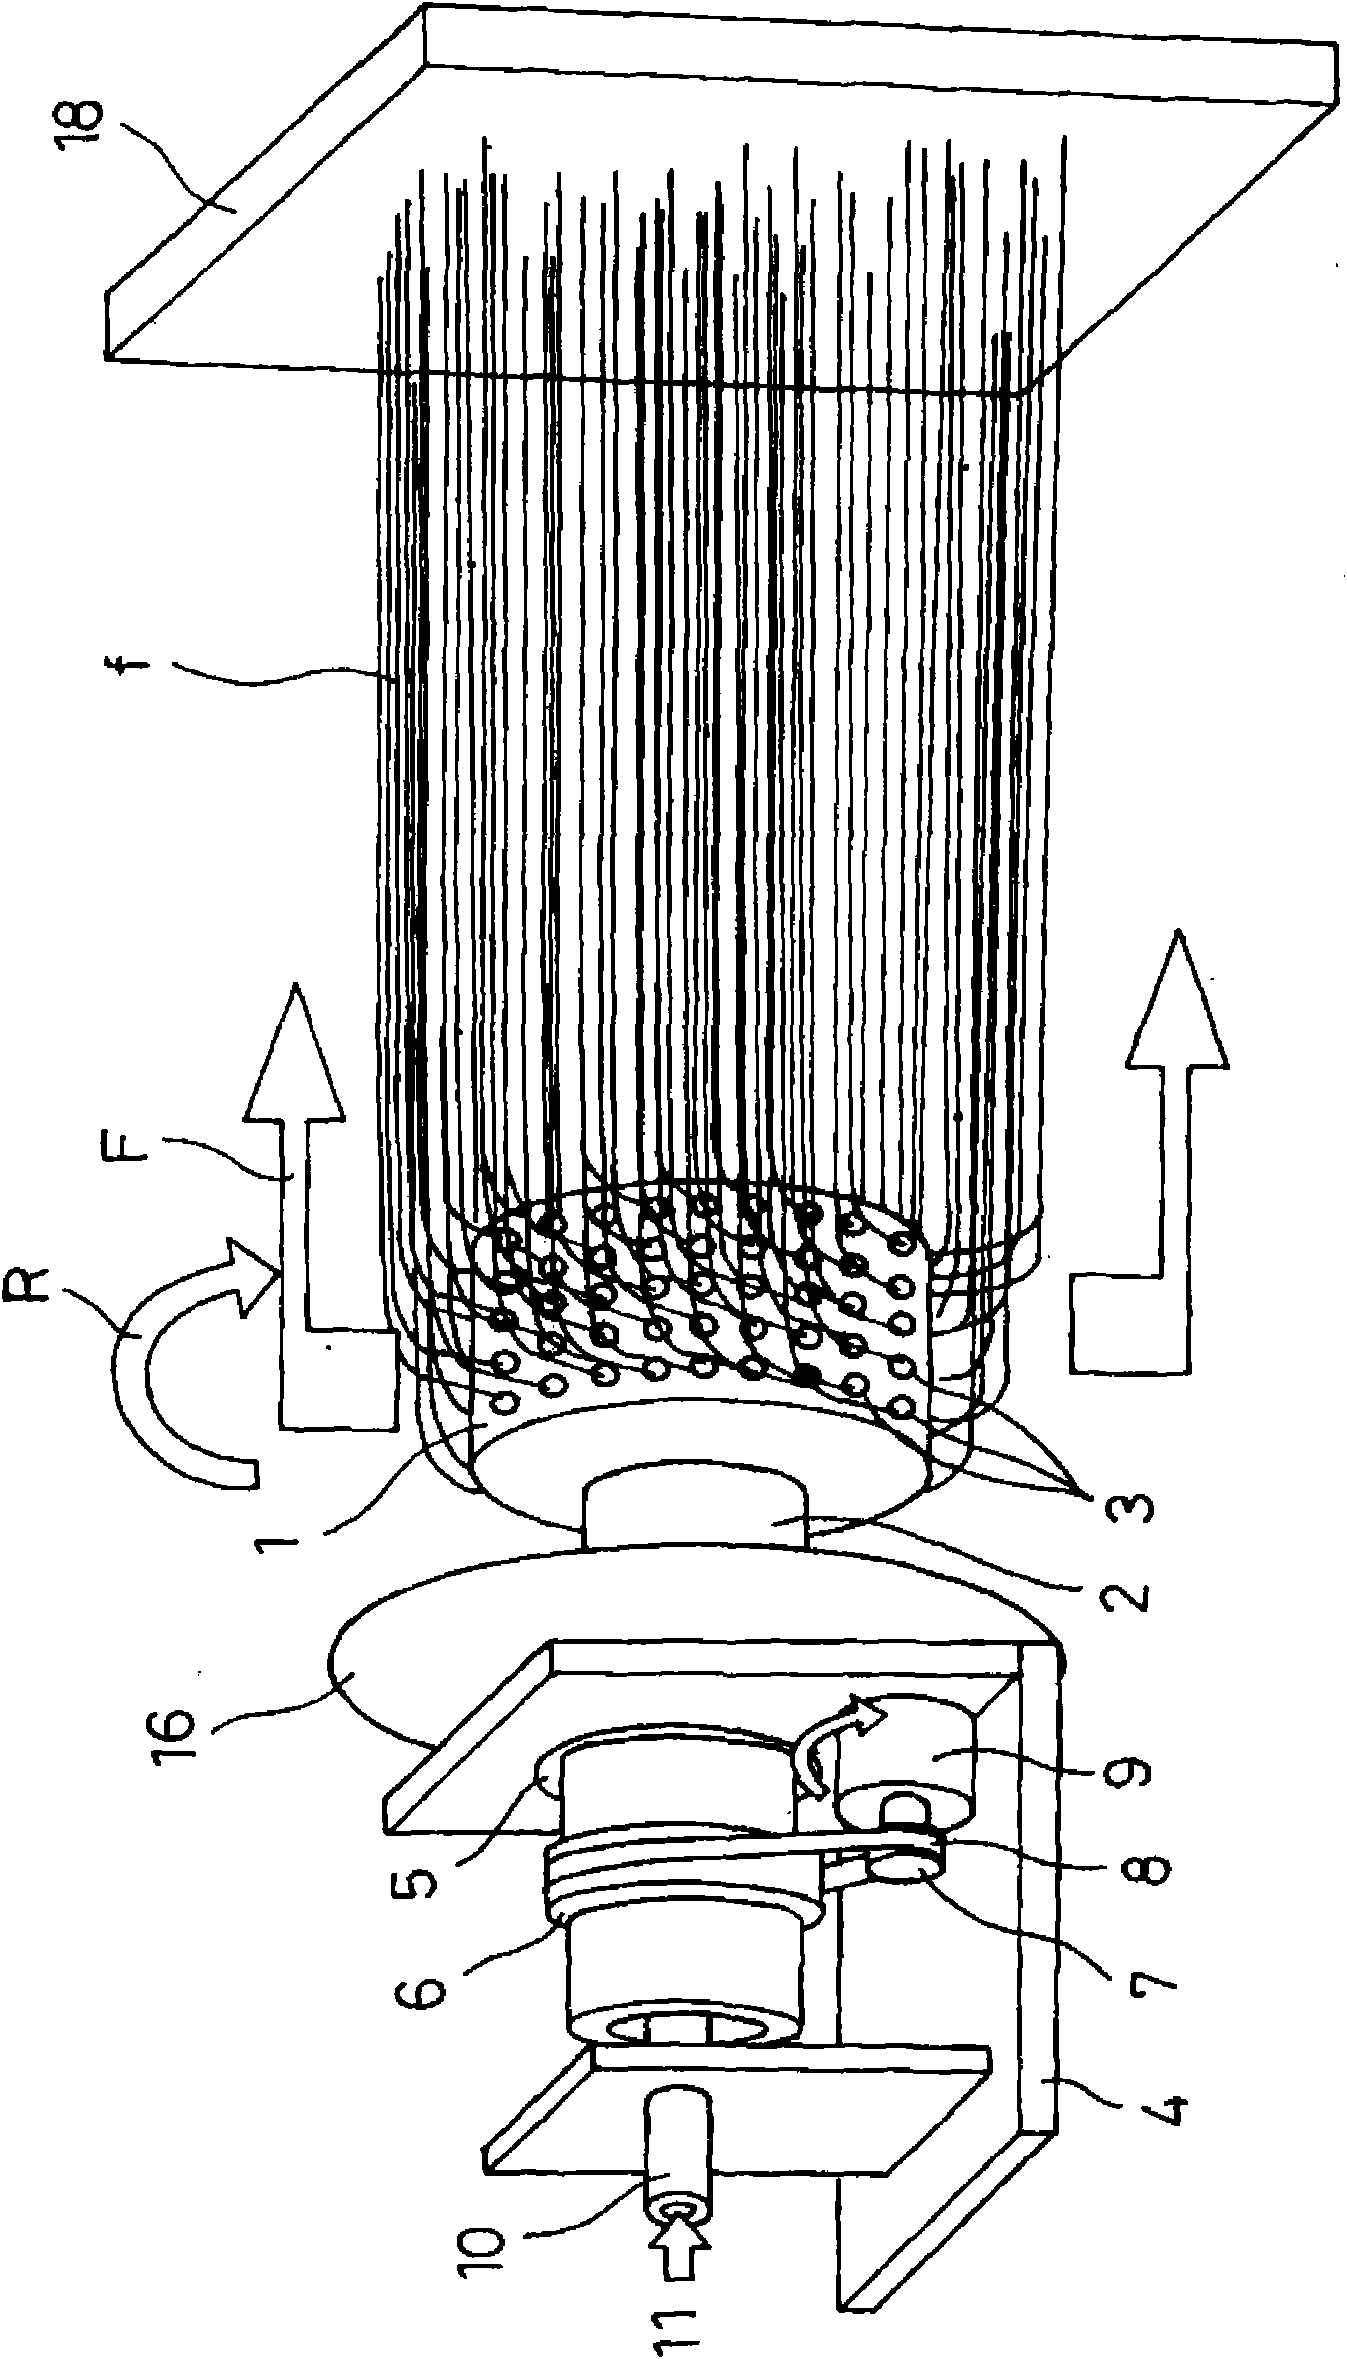 Process and apparatus for producing nanofiber and polymer web